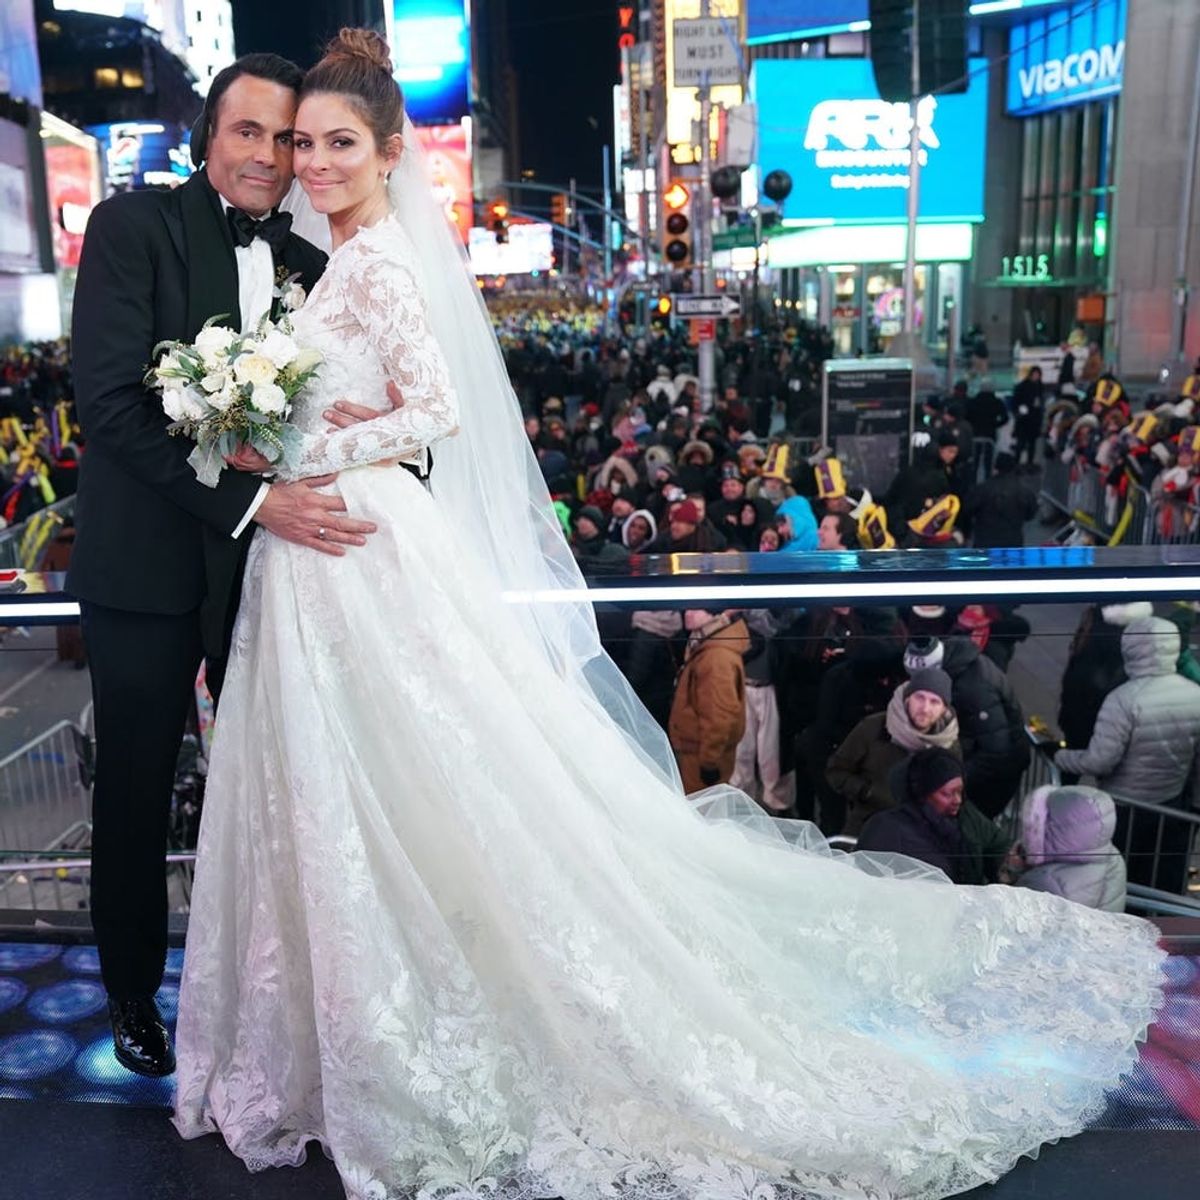 Maria Menounos Married Her Partner of 20 Years on a Live New Year’s Eve Show